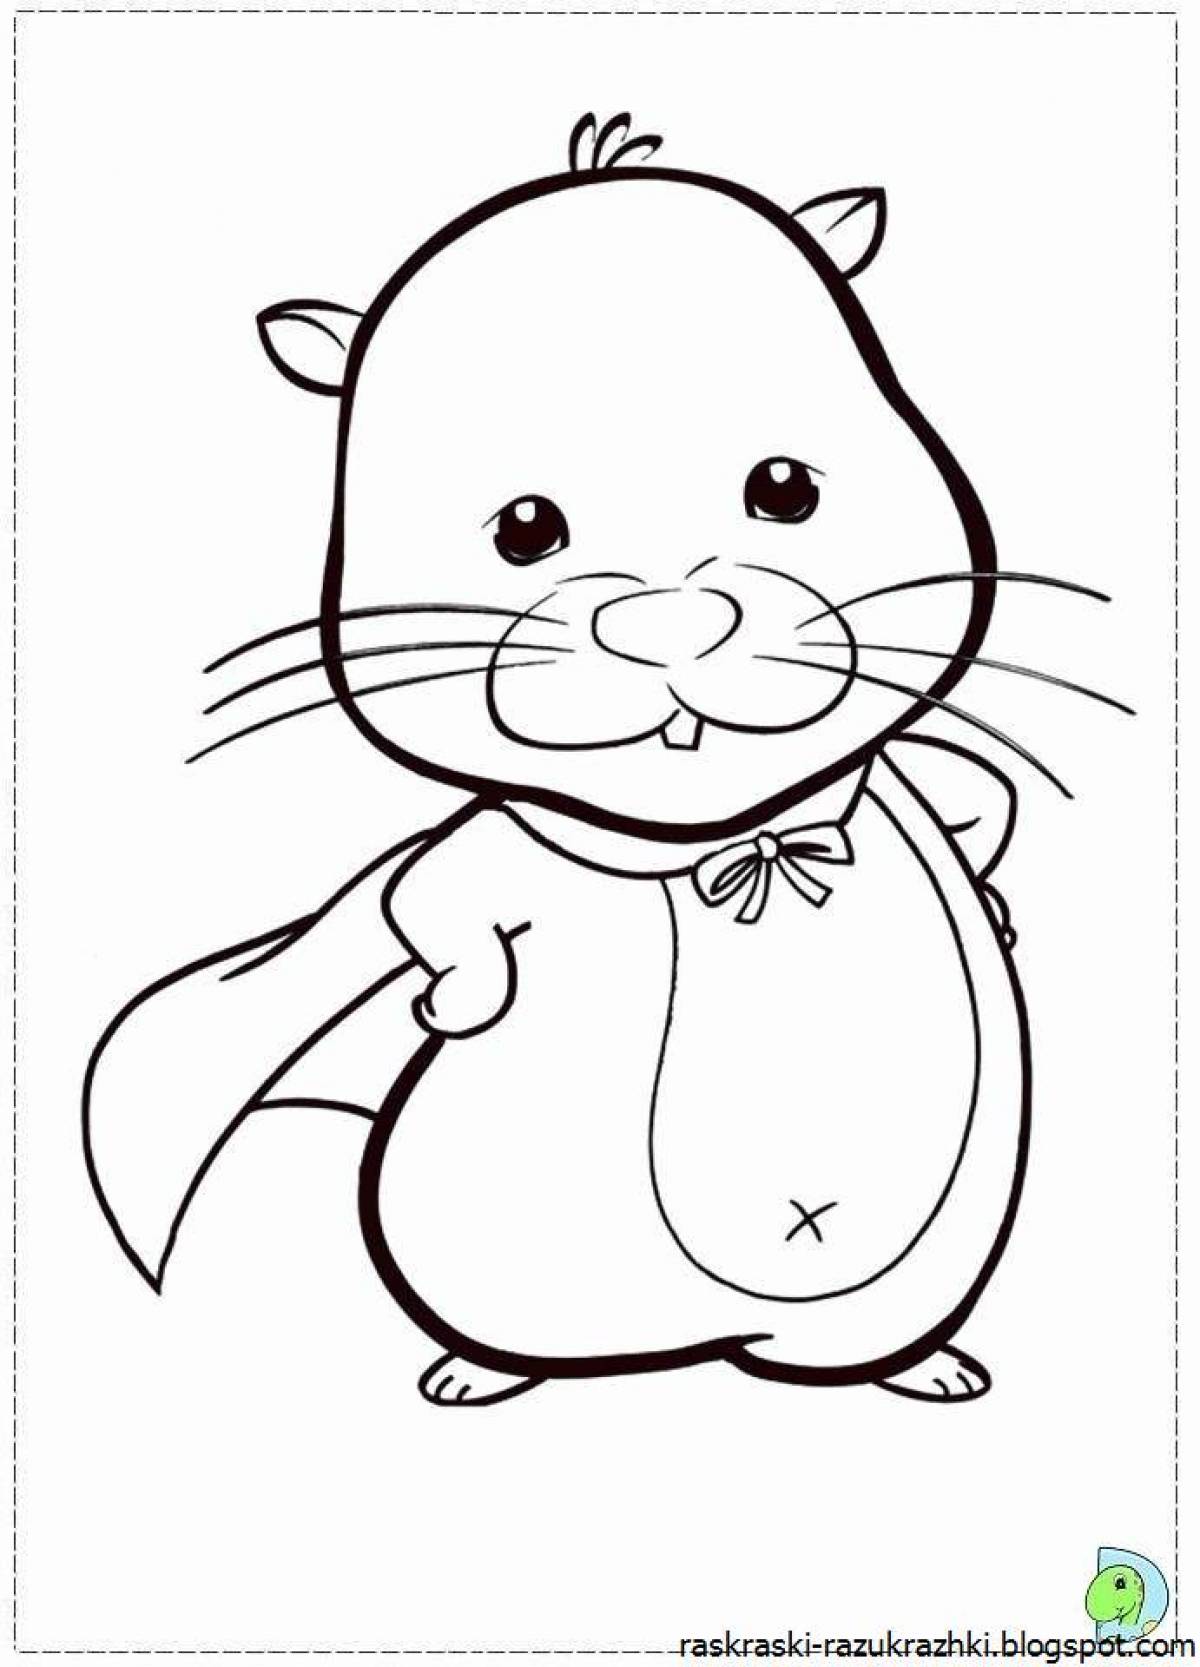 Coloring book dazzling hamster for kids